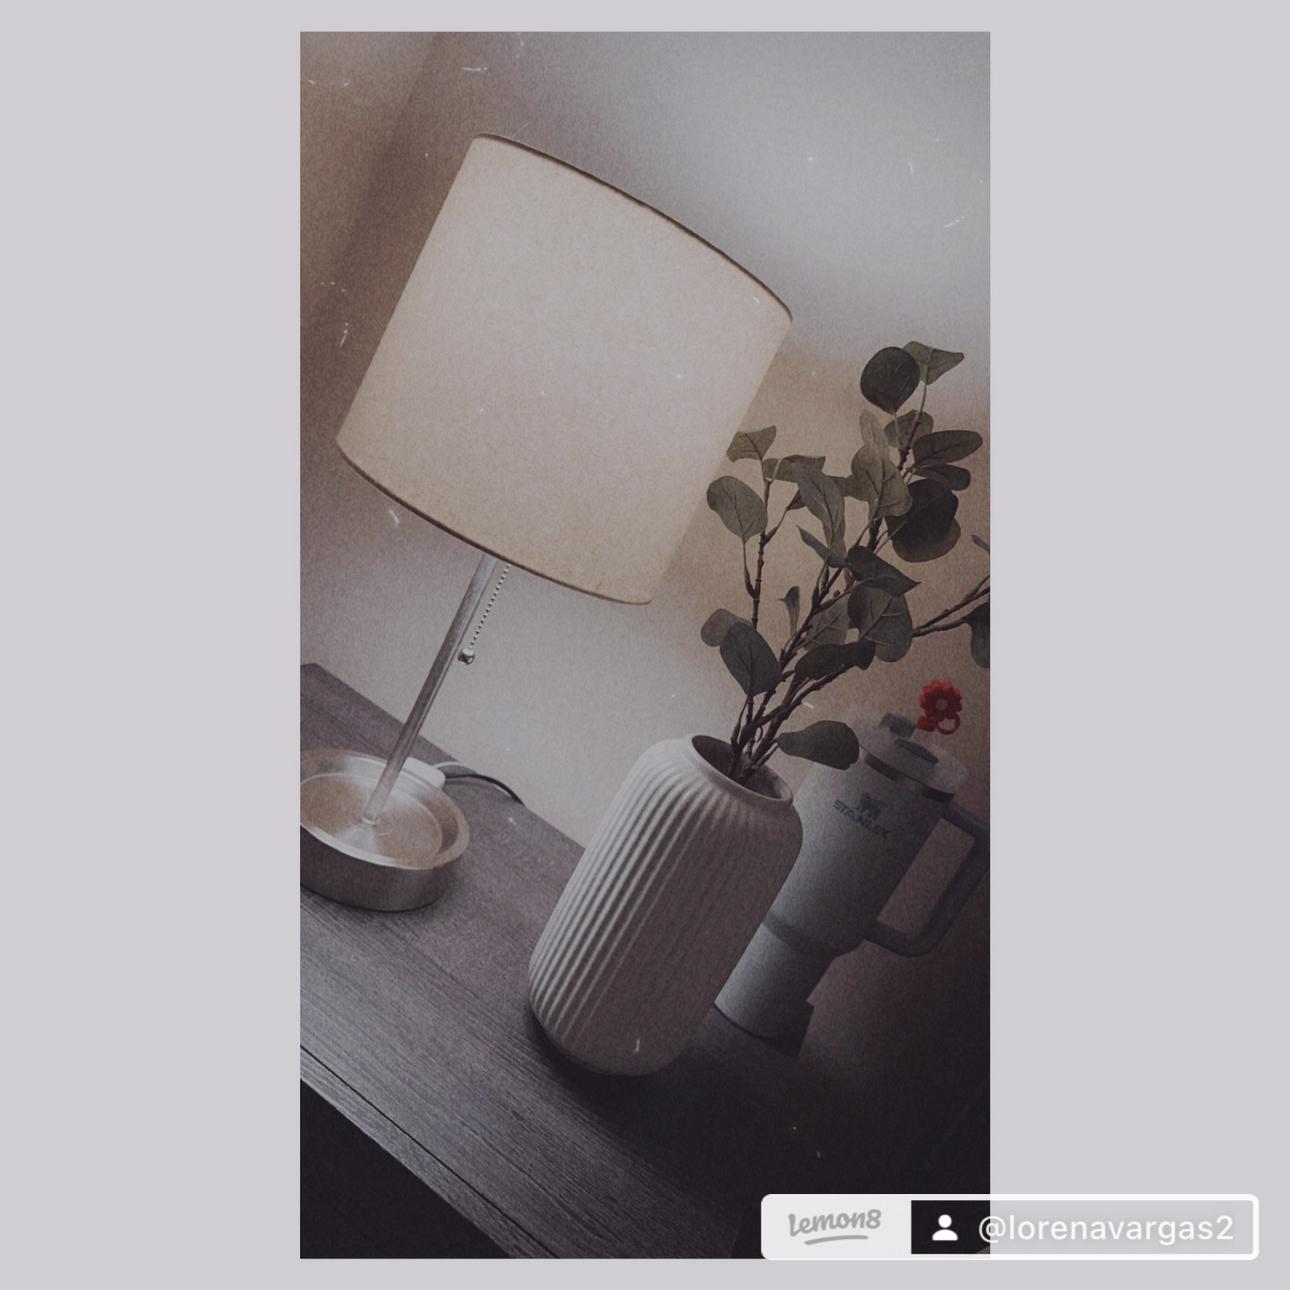 Marie ♥️'s images